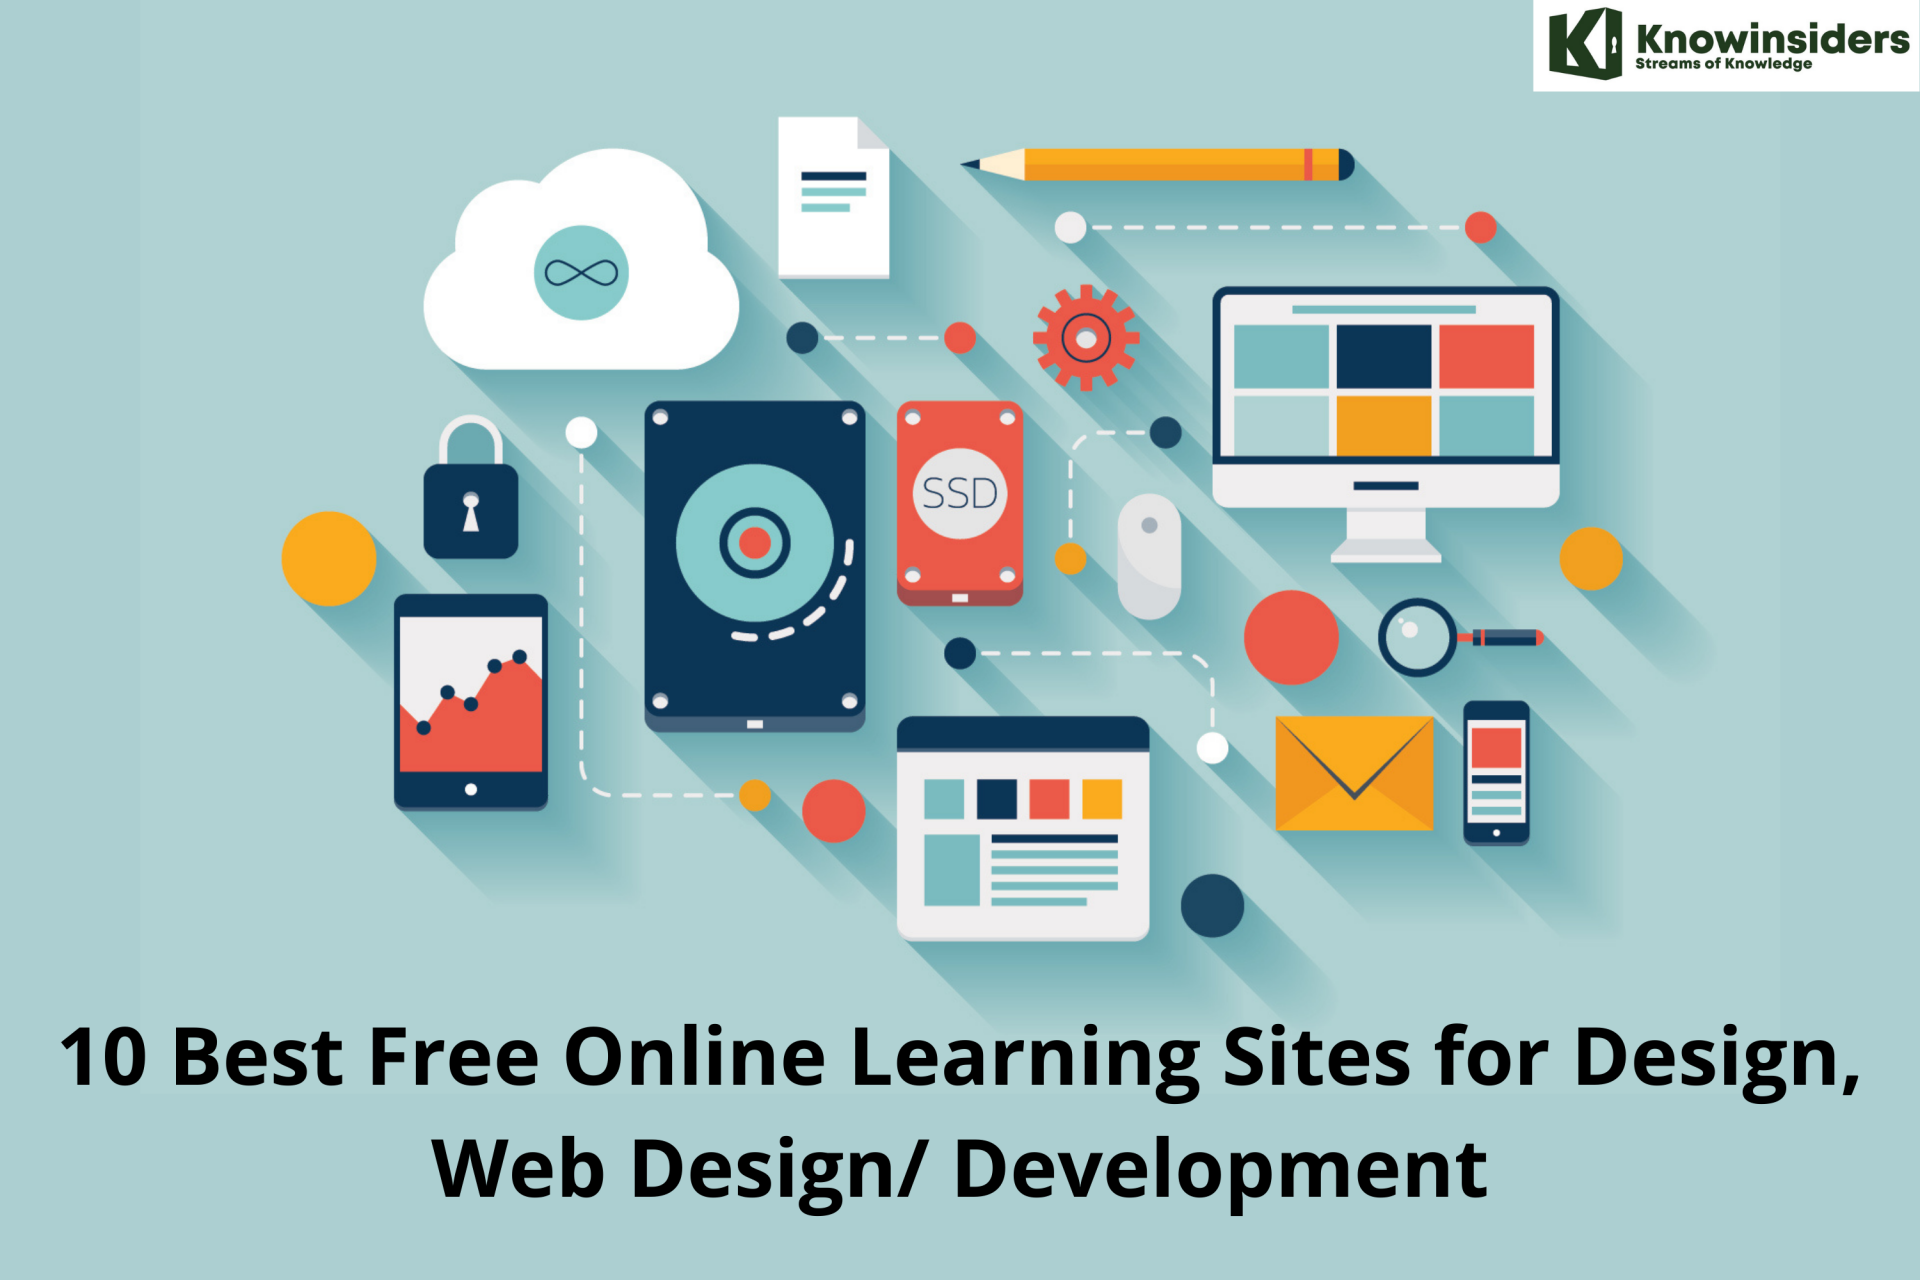 Top 10 Best Free Online Learning Sites for Design and Web Development